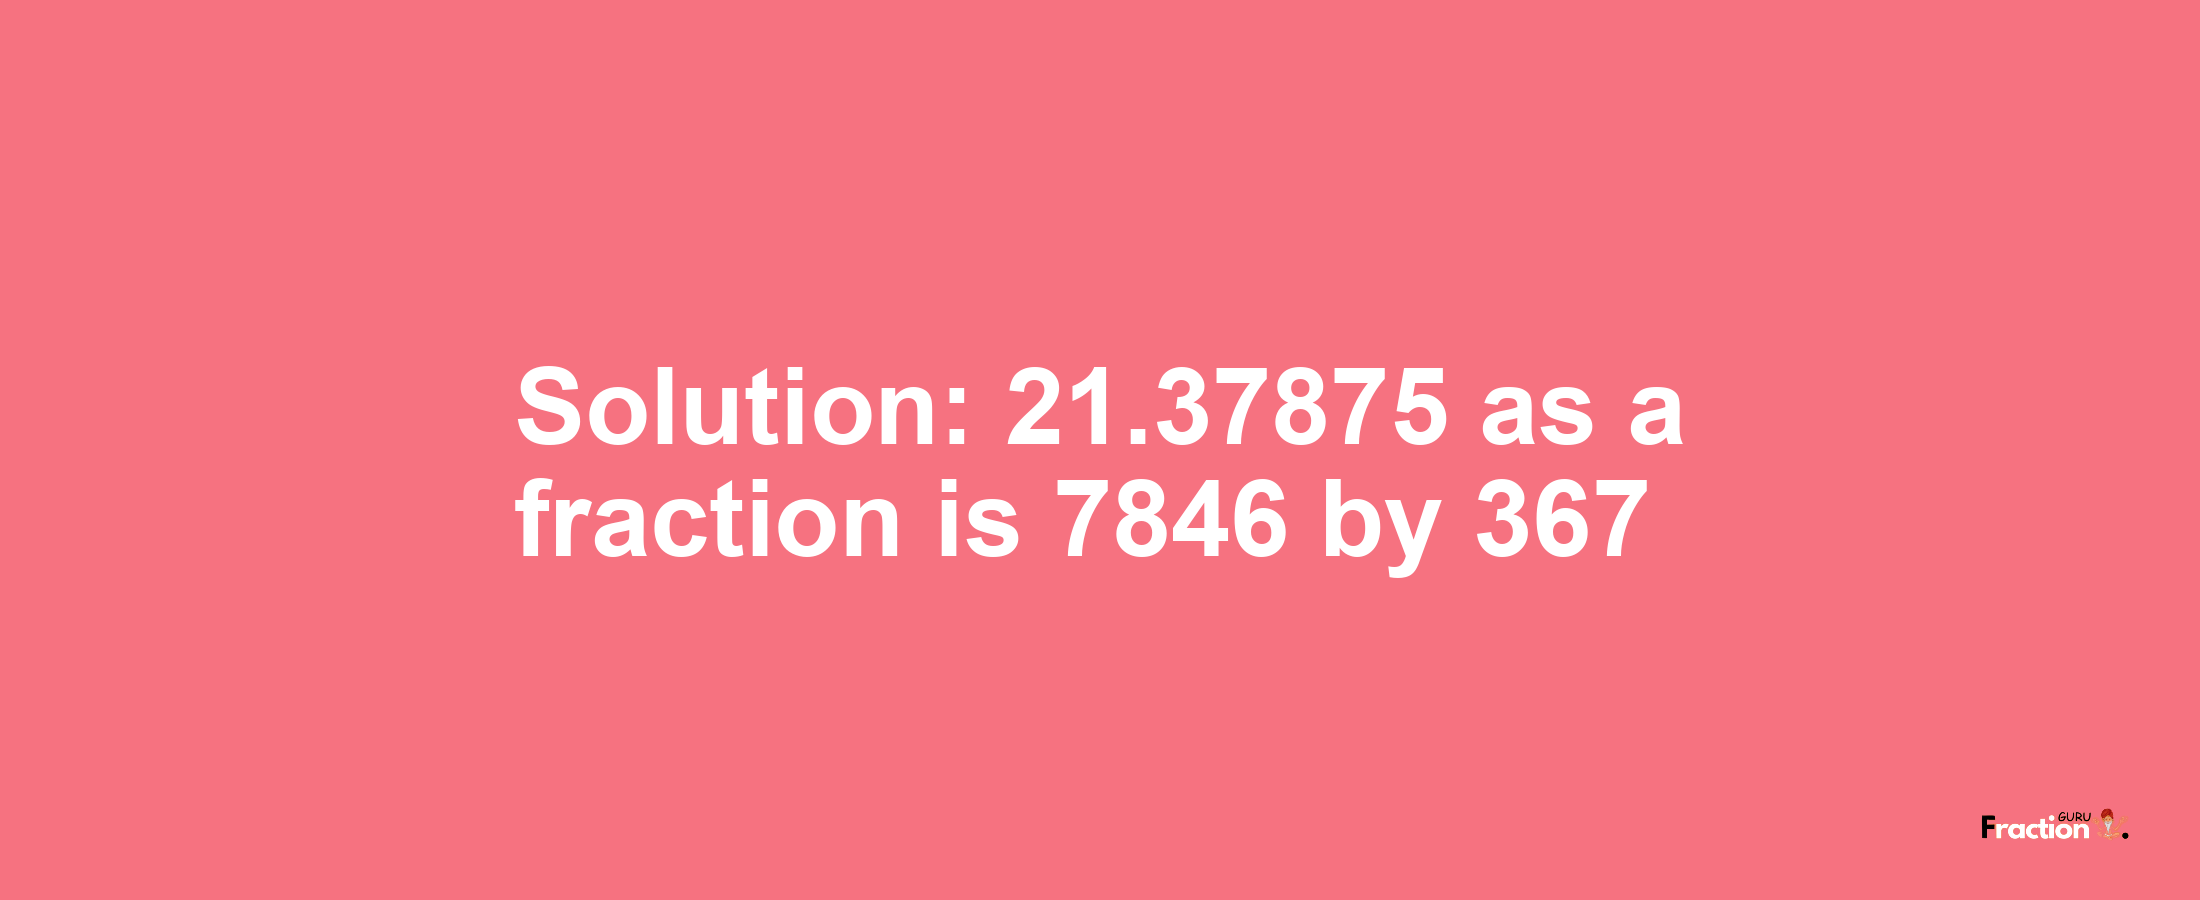 Solution:21.37875 as a fraction is 7846/367